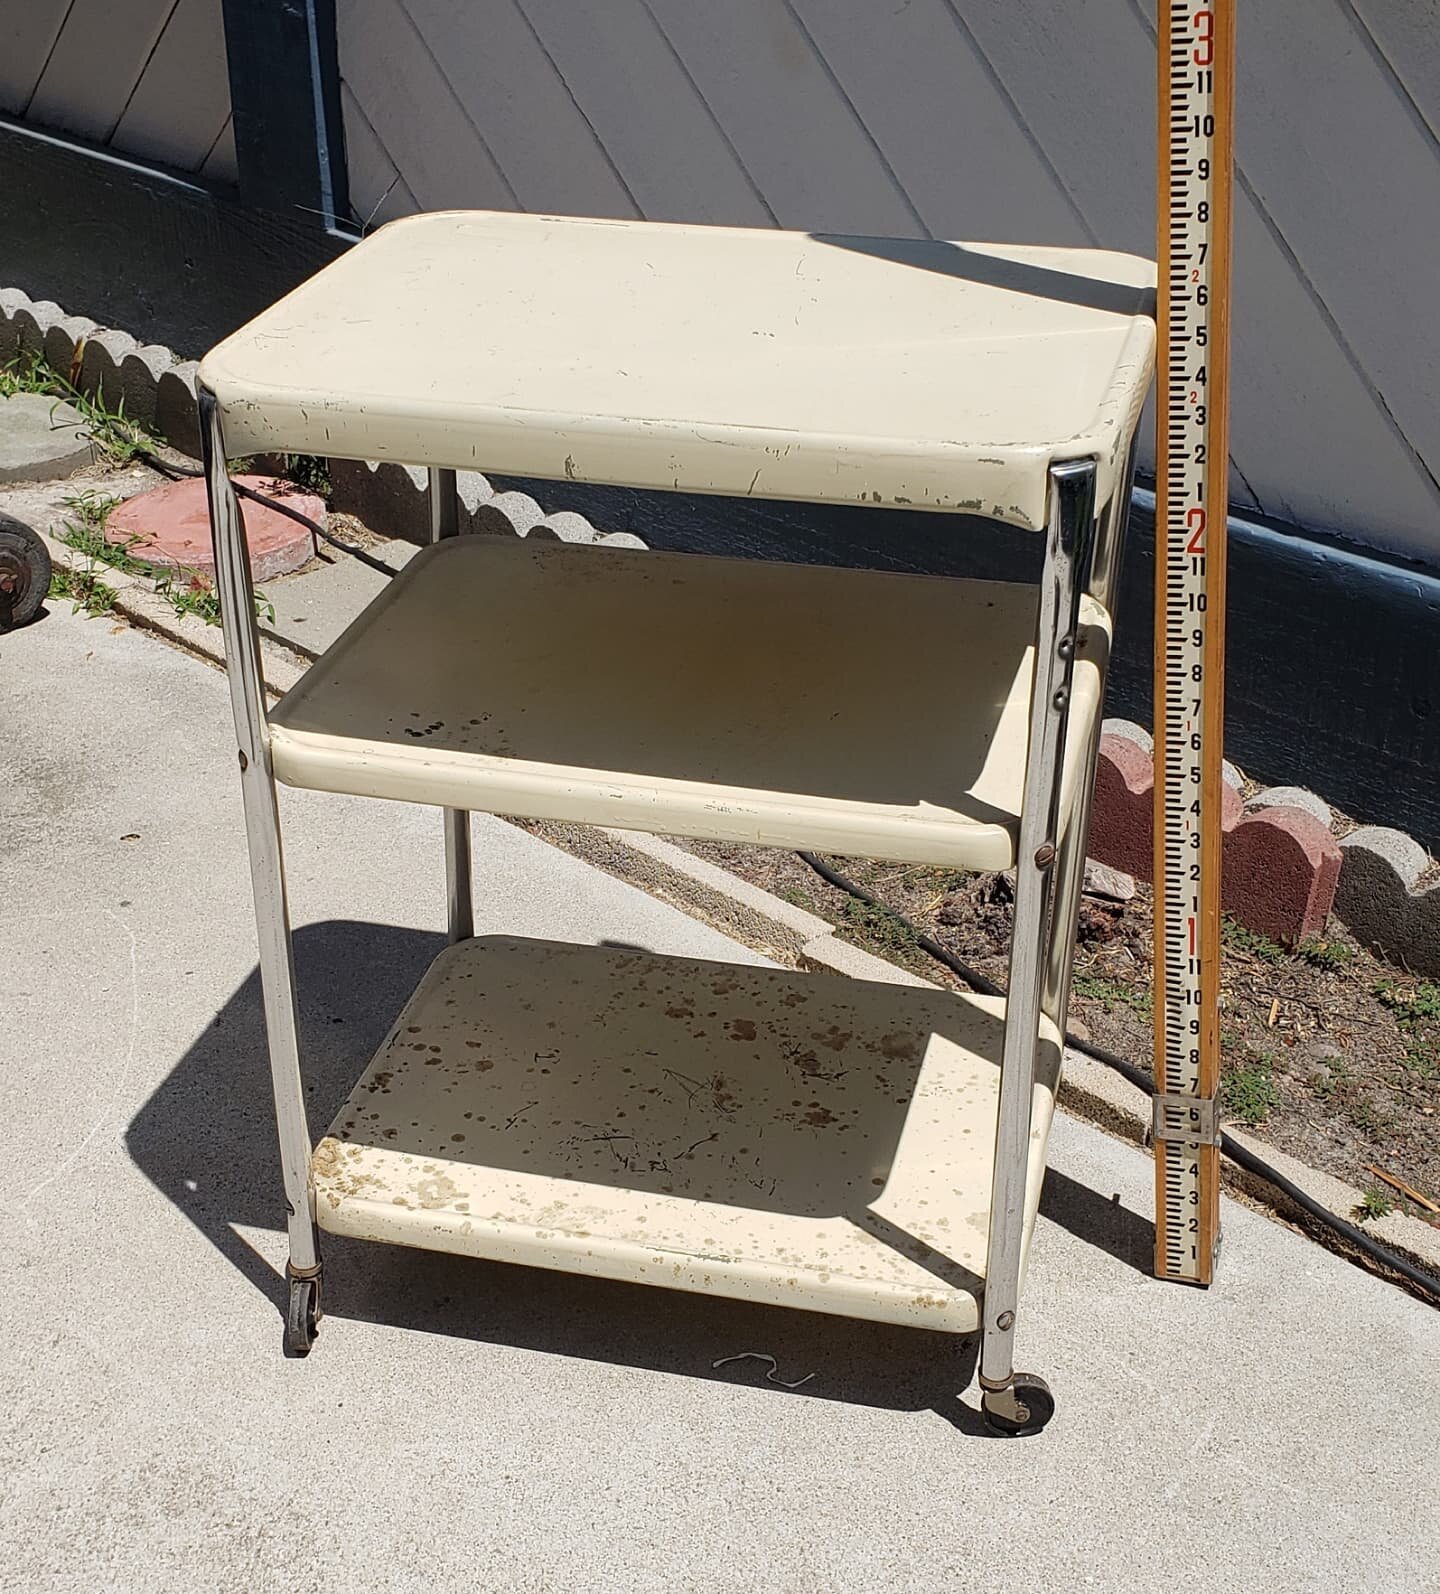 $45. Vintage metal bar TV Television stand with wheels. Works great. 3 shelf unit. 30&quot; tall 22&quot; wide 16&quot; deep. Work bench garden cart
Plus tax.
This item is located in my Antique Mall booth in the city or Orange. Text Message (don't ca